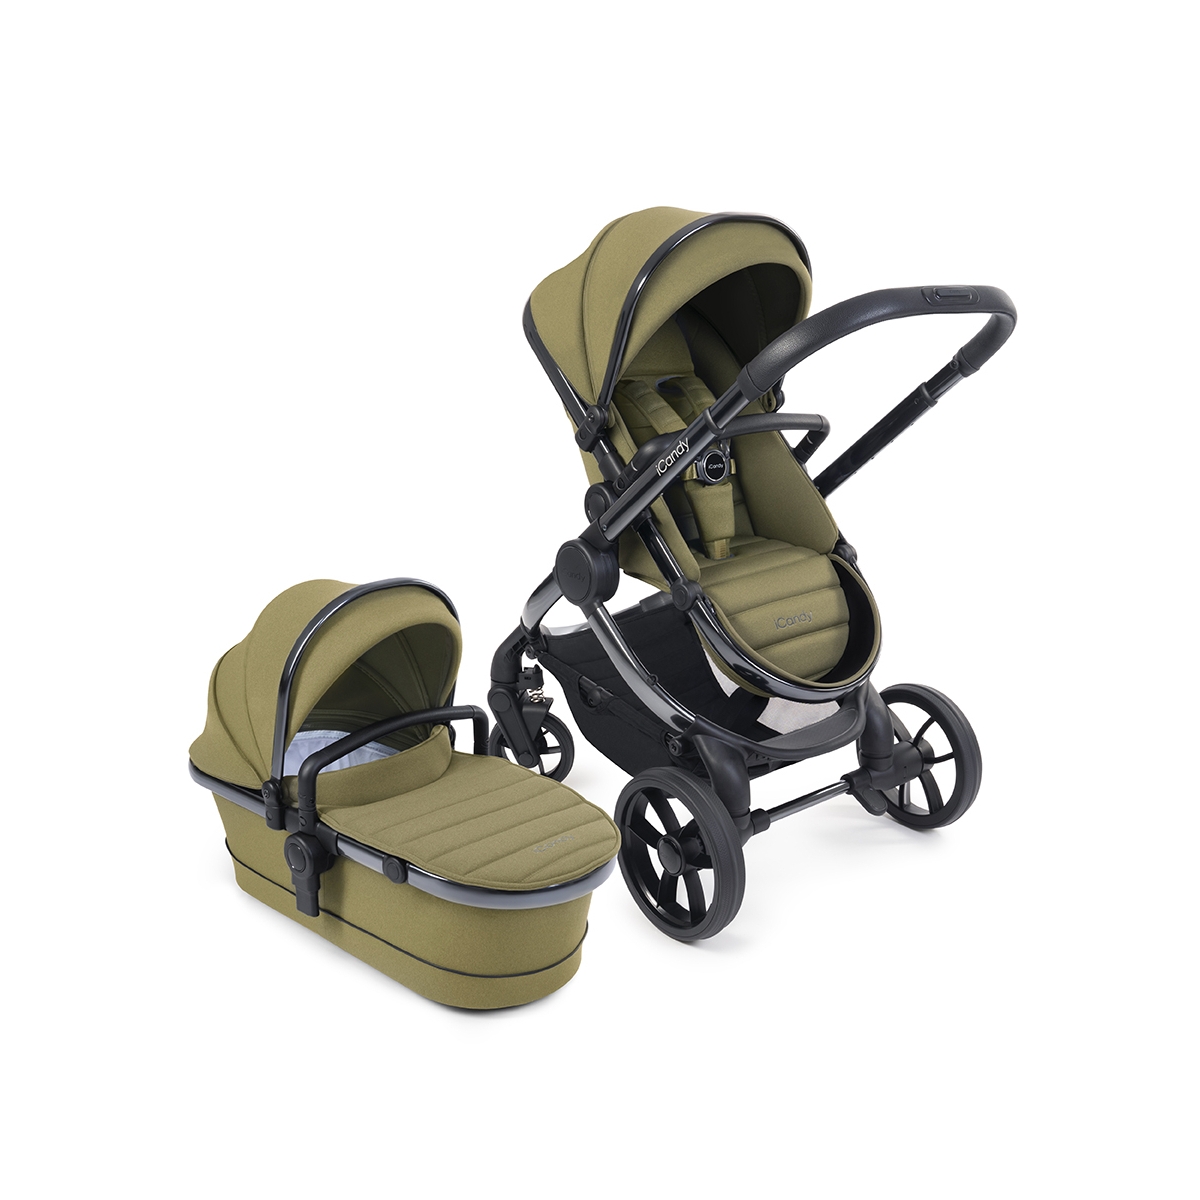 iCandy Peach 7 2in1 Combo Pushchair Bundle